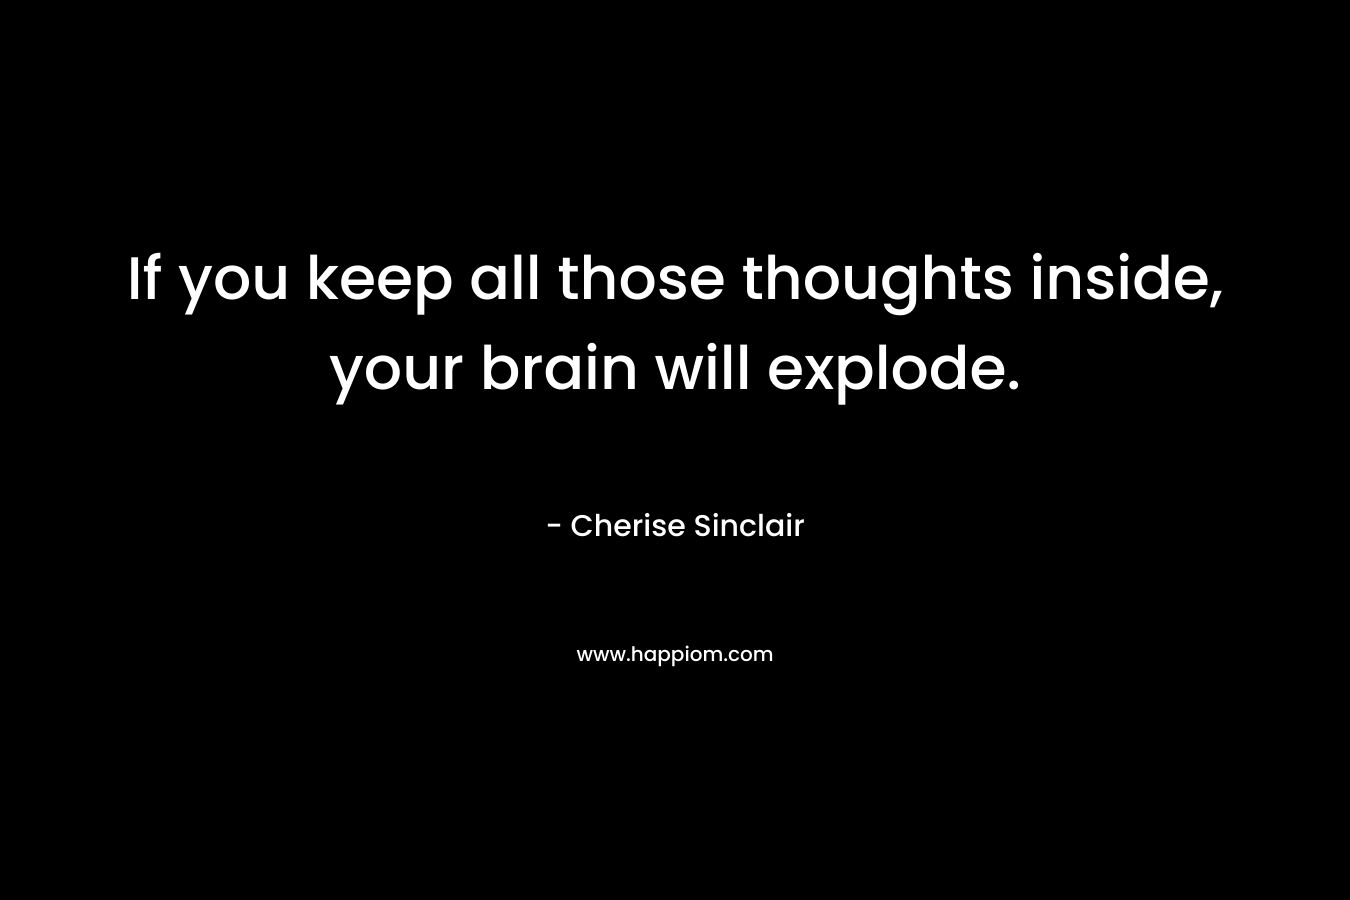 If you keep all those thoughts inside, your brain will explode.